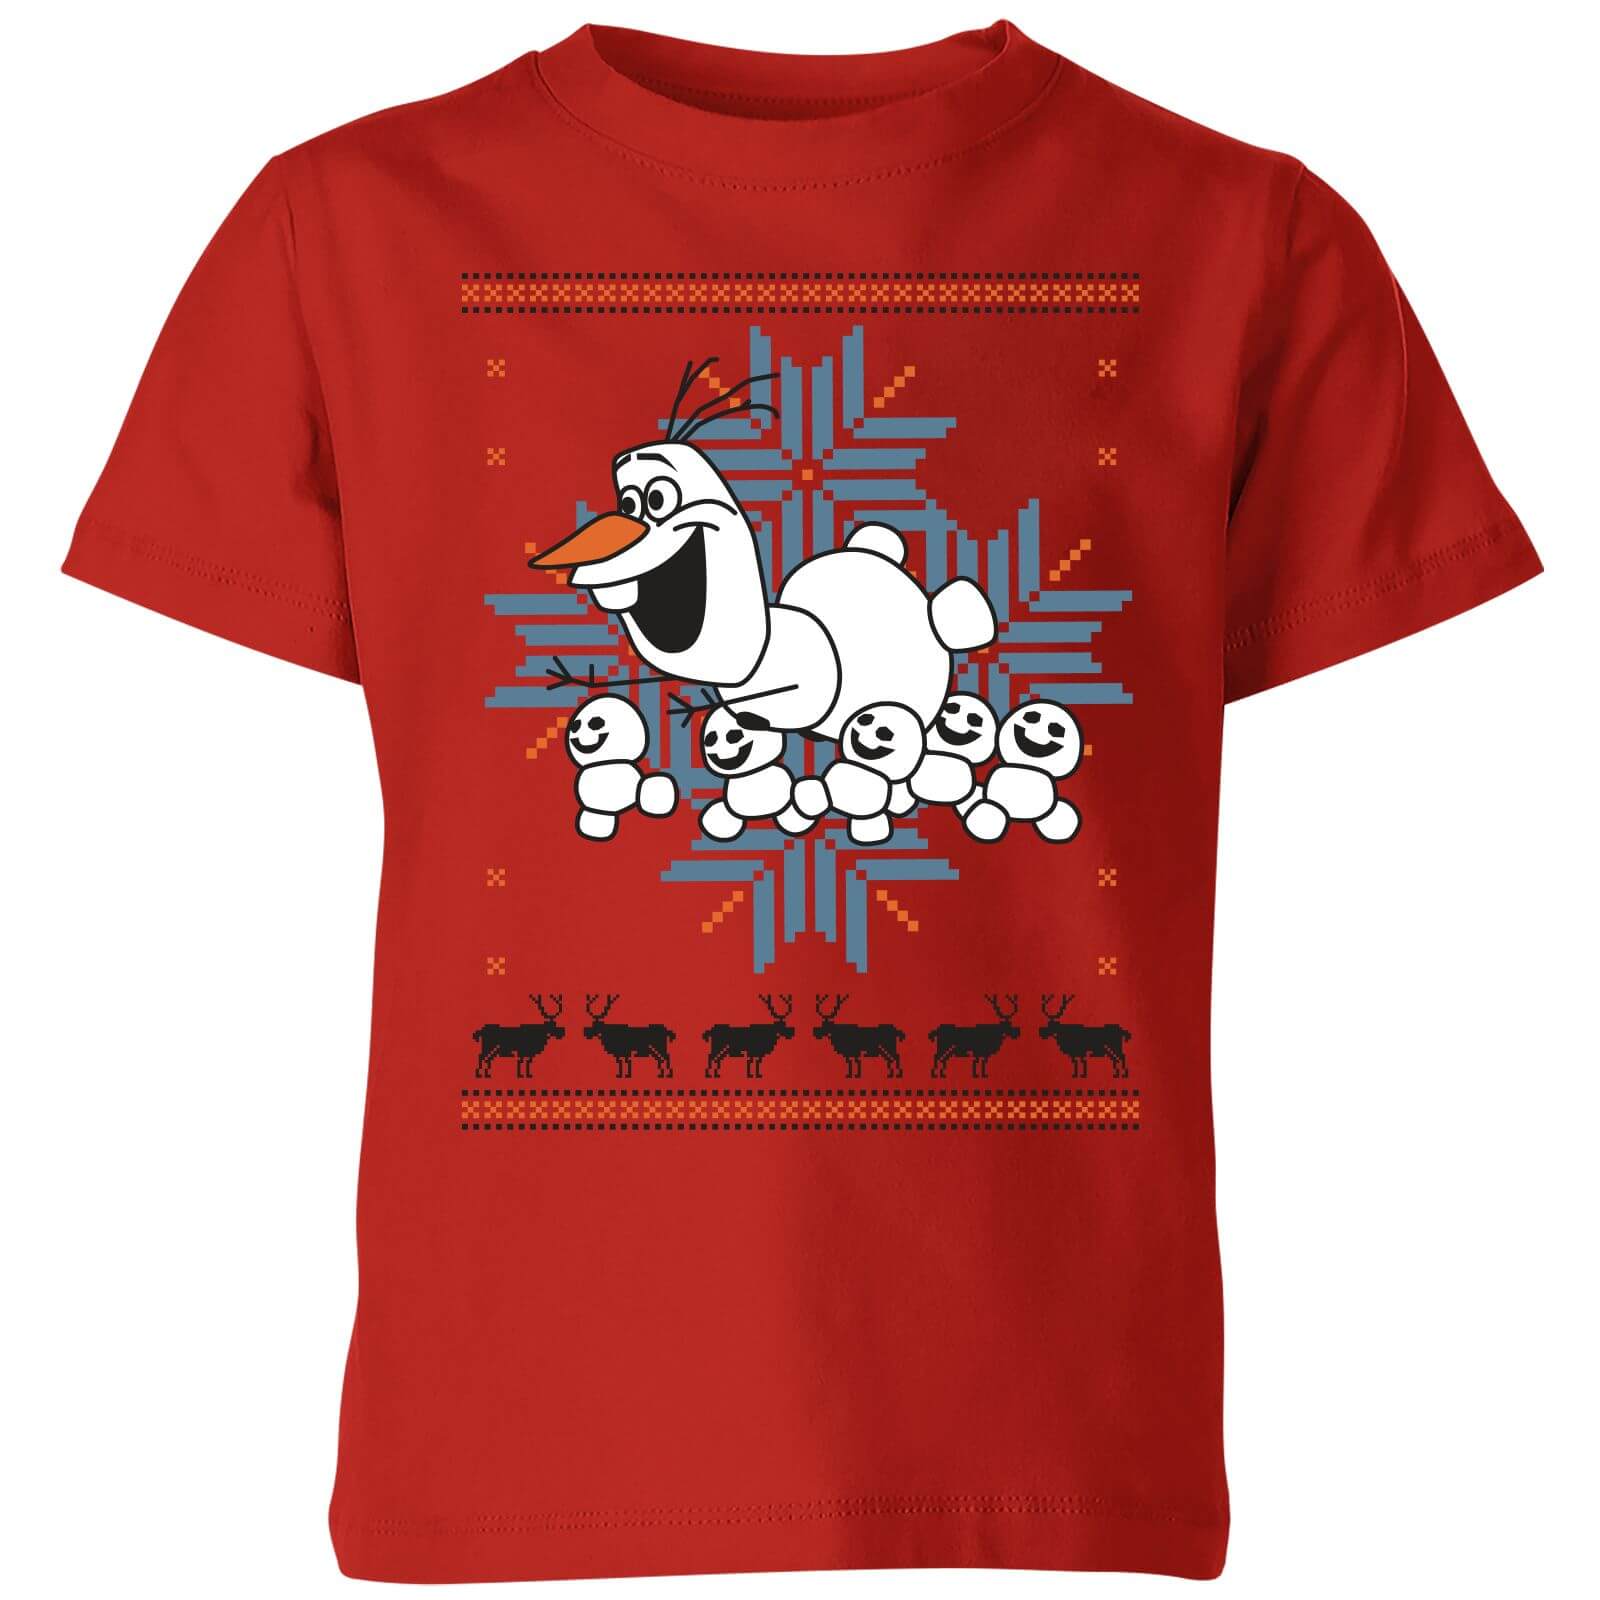 Disney Frozen Olaf And Snowmen Kids' Christmas T-Shirt - Red - 3-4 Years